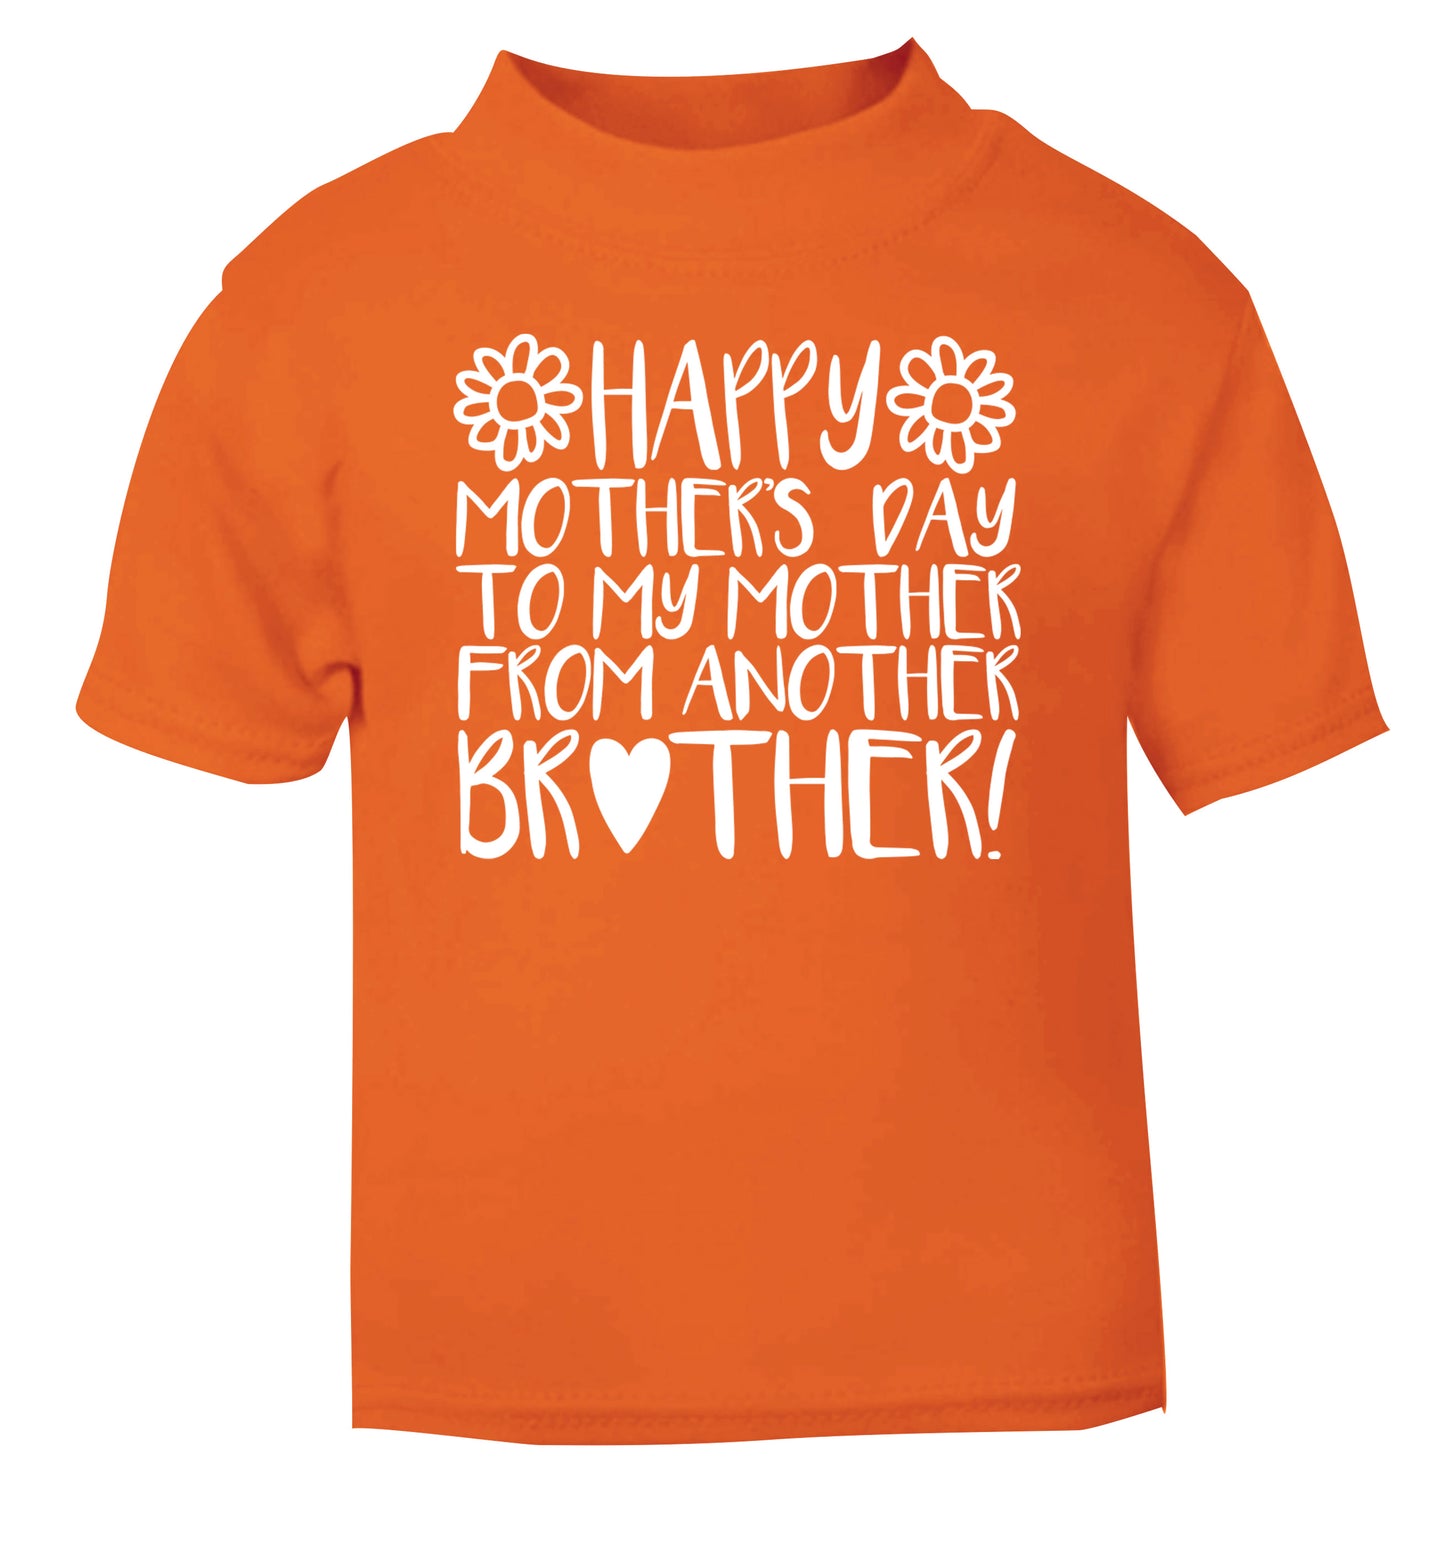 Happy mother's day to my mother from another brother orange Baby Toddler Tshirt 2 Years